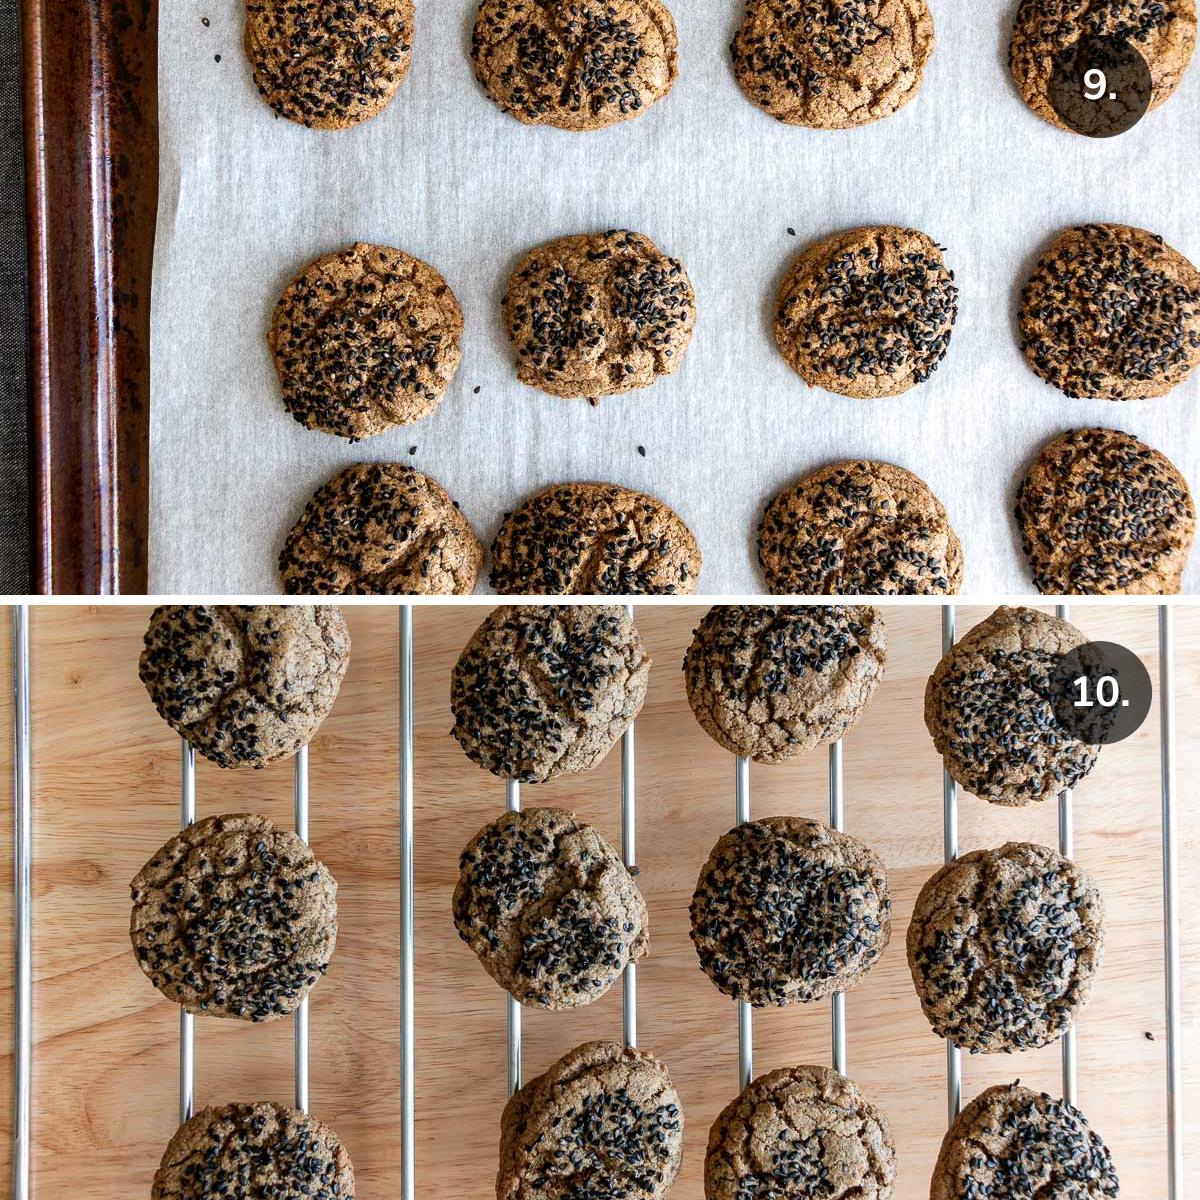 Freshly baked black sesame seed cookies out of the oven and cooling on a wire rack.